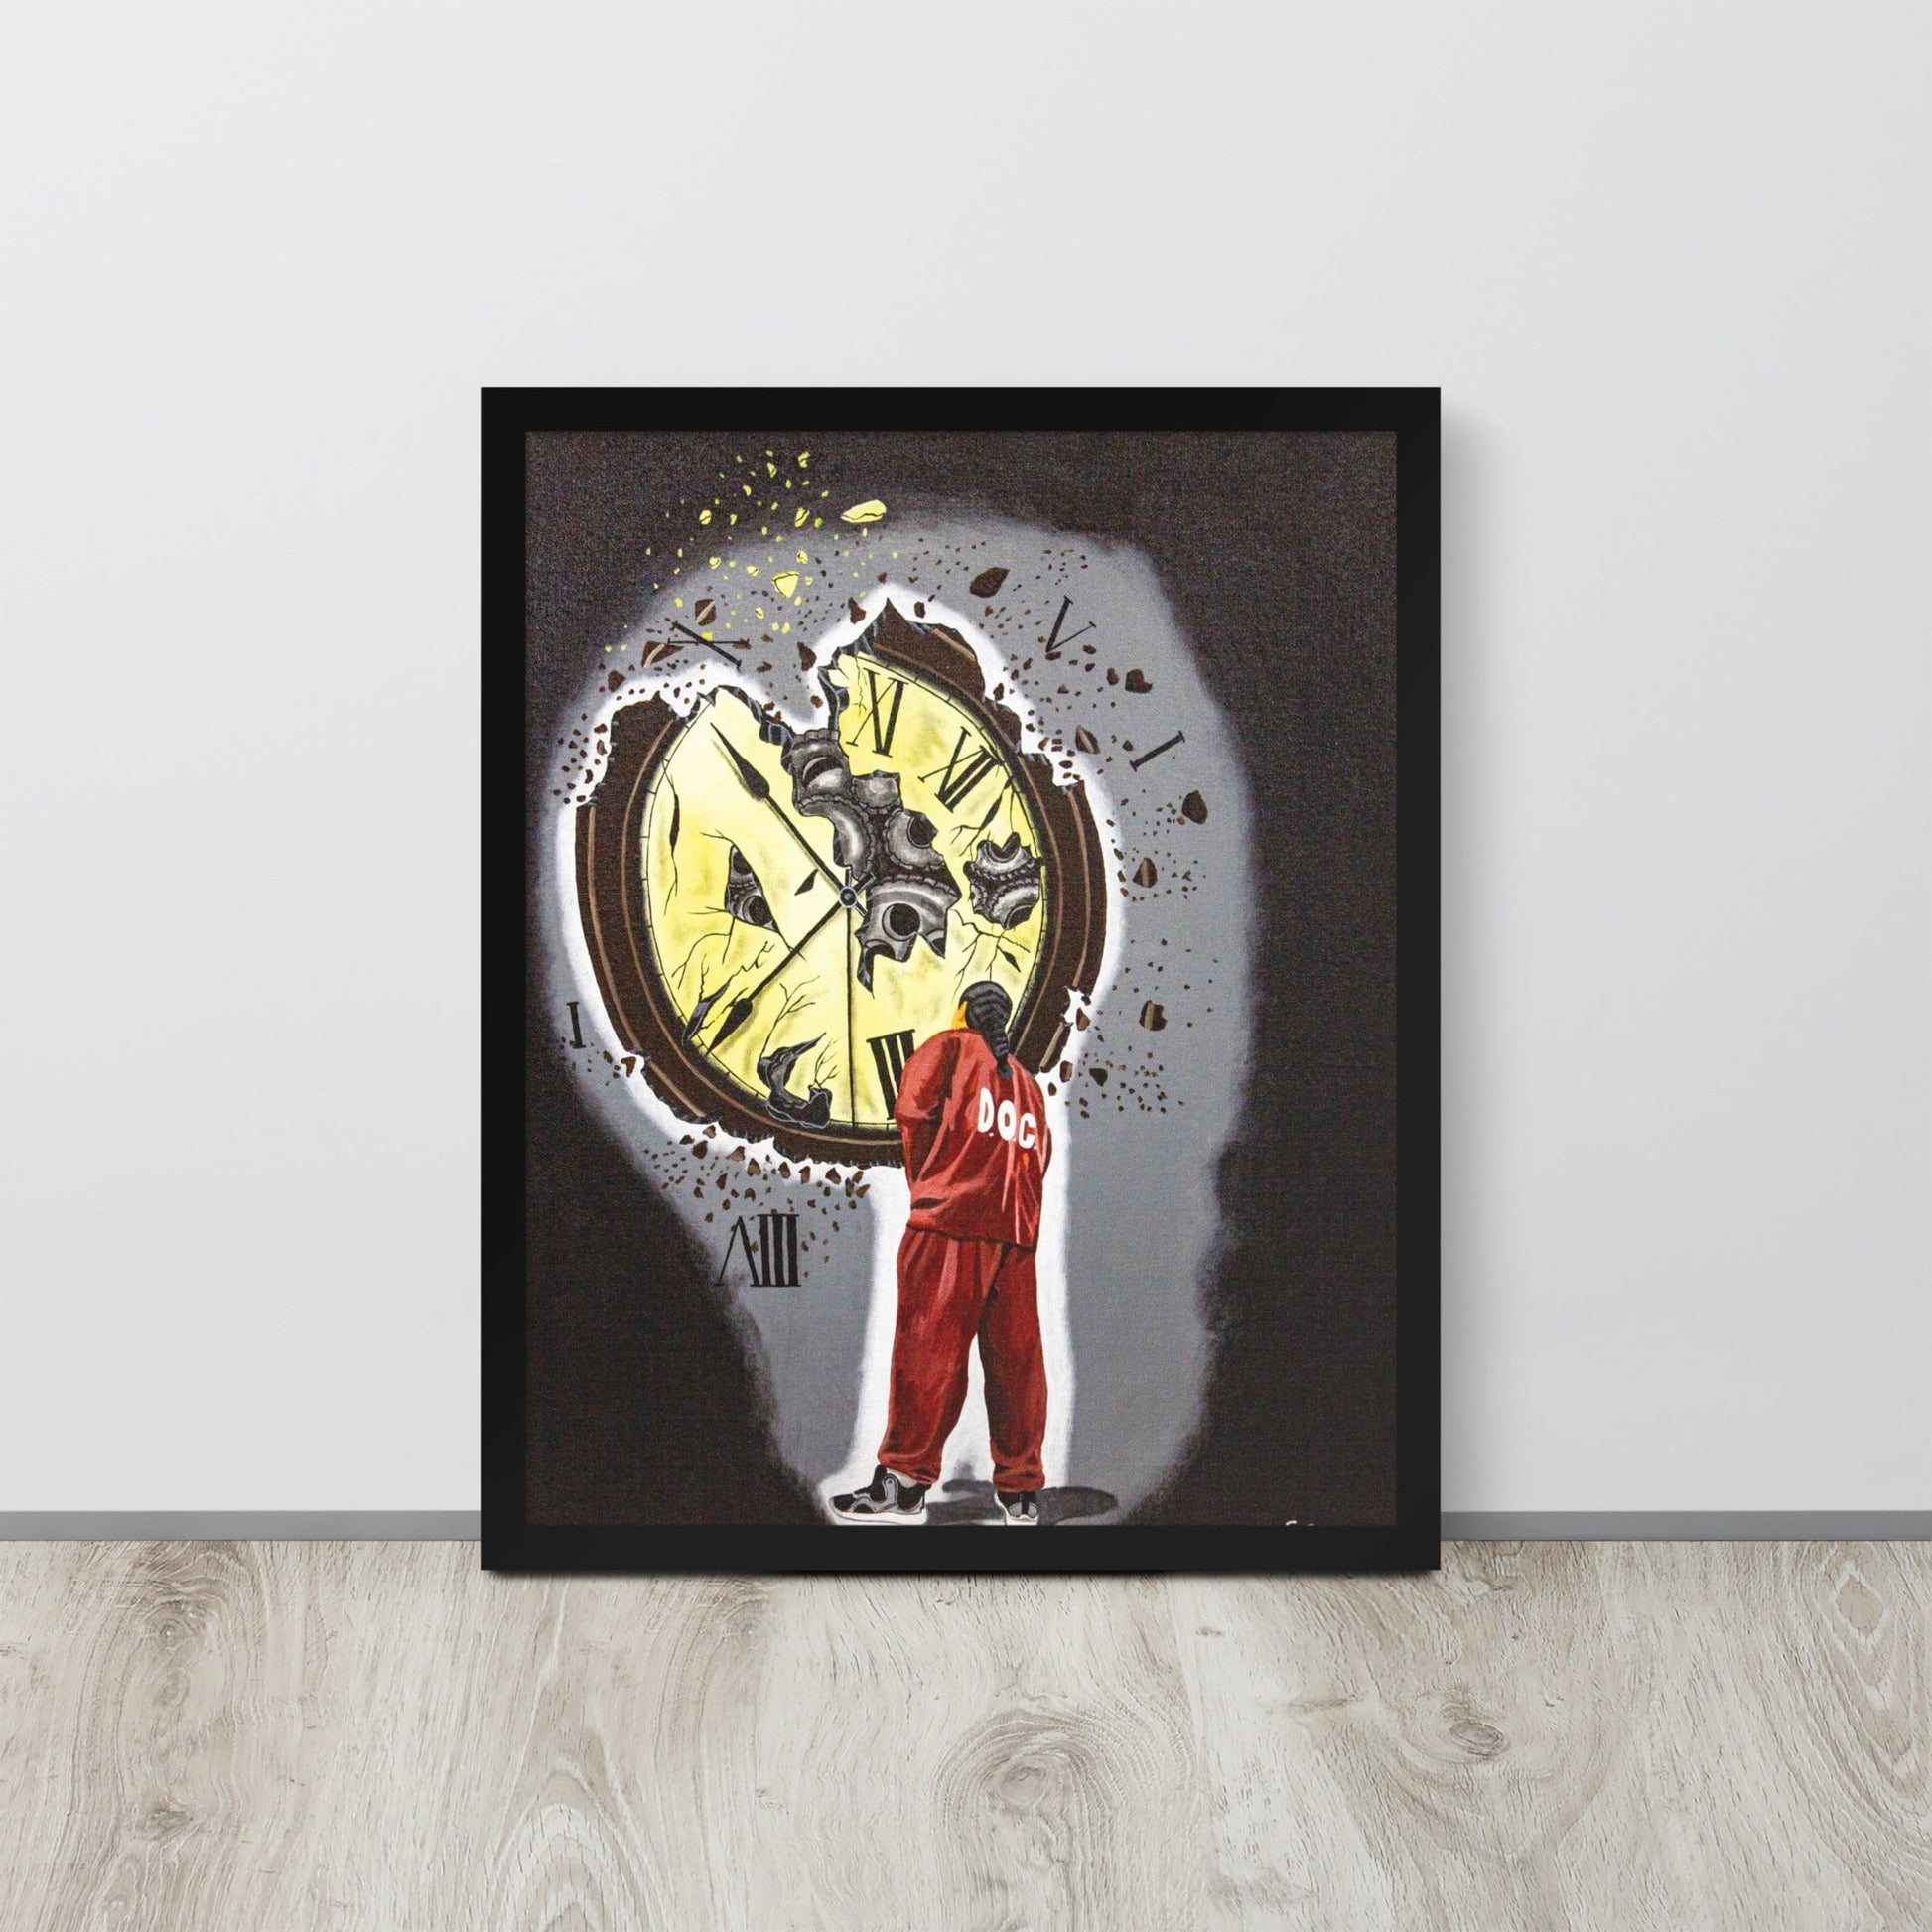 "Time turned into dust" fine prison art Print on Demand The Exile Frame Print Medium